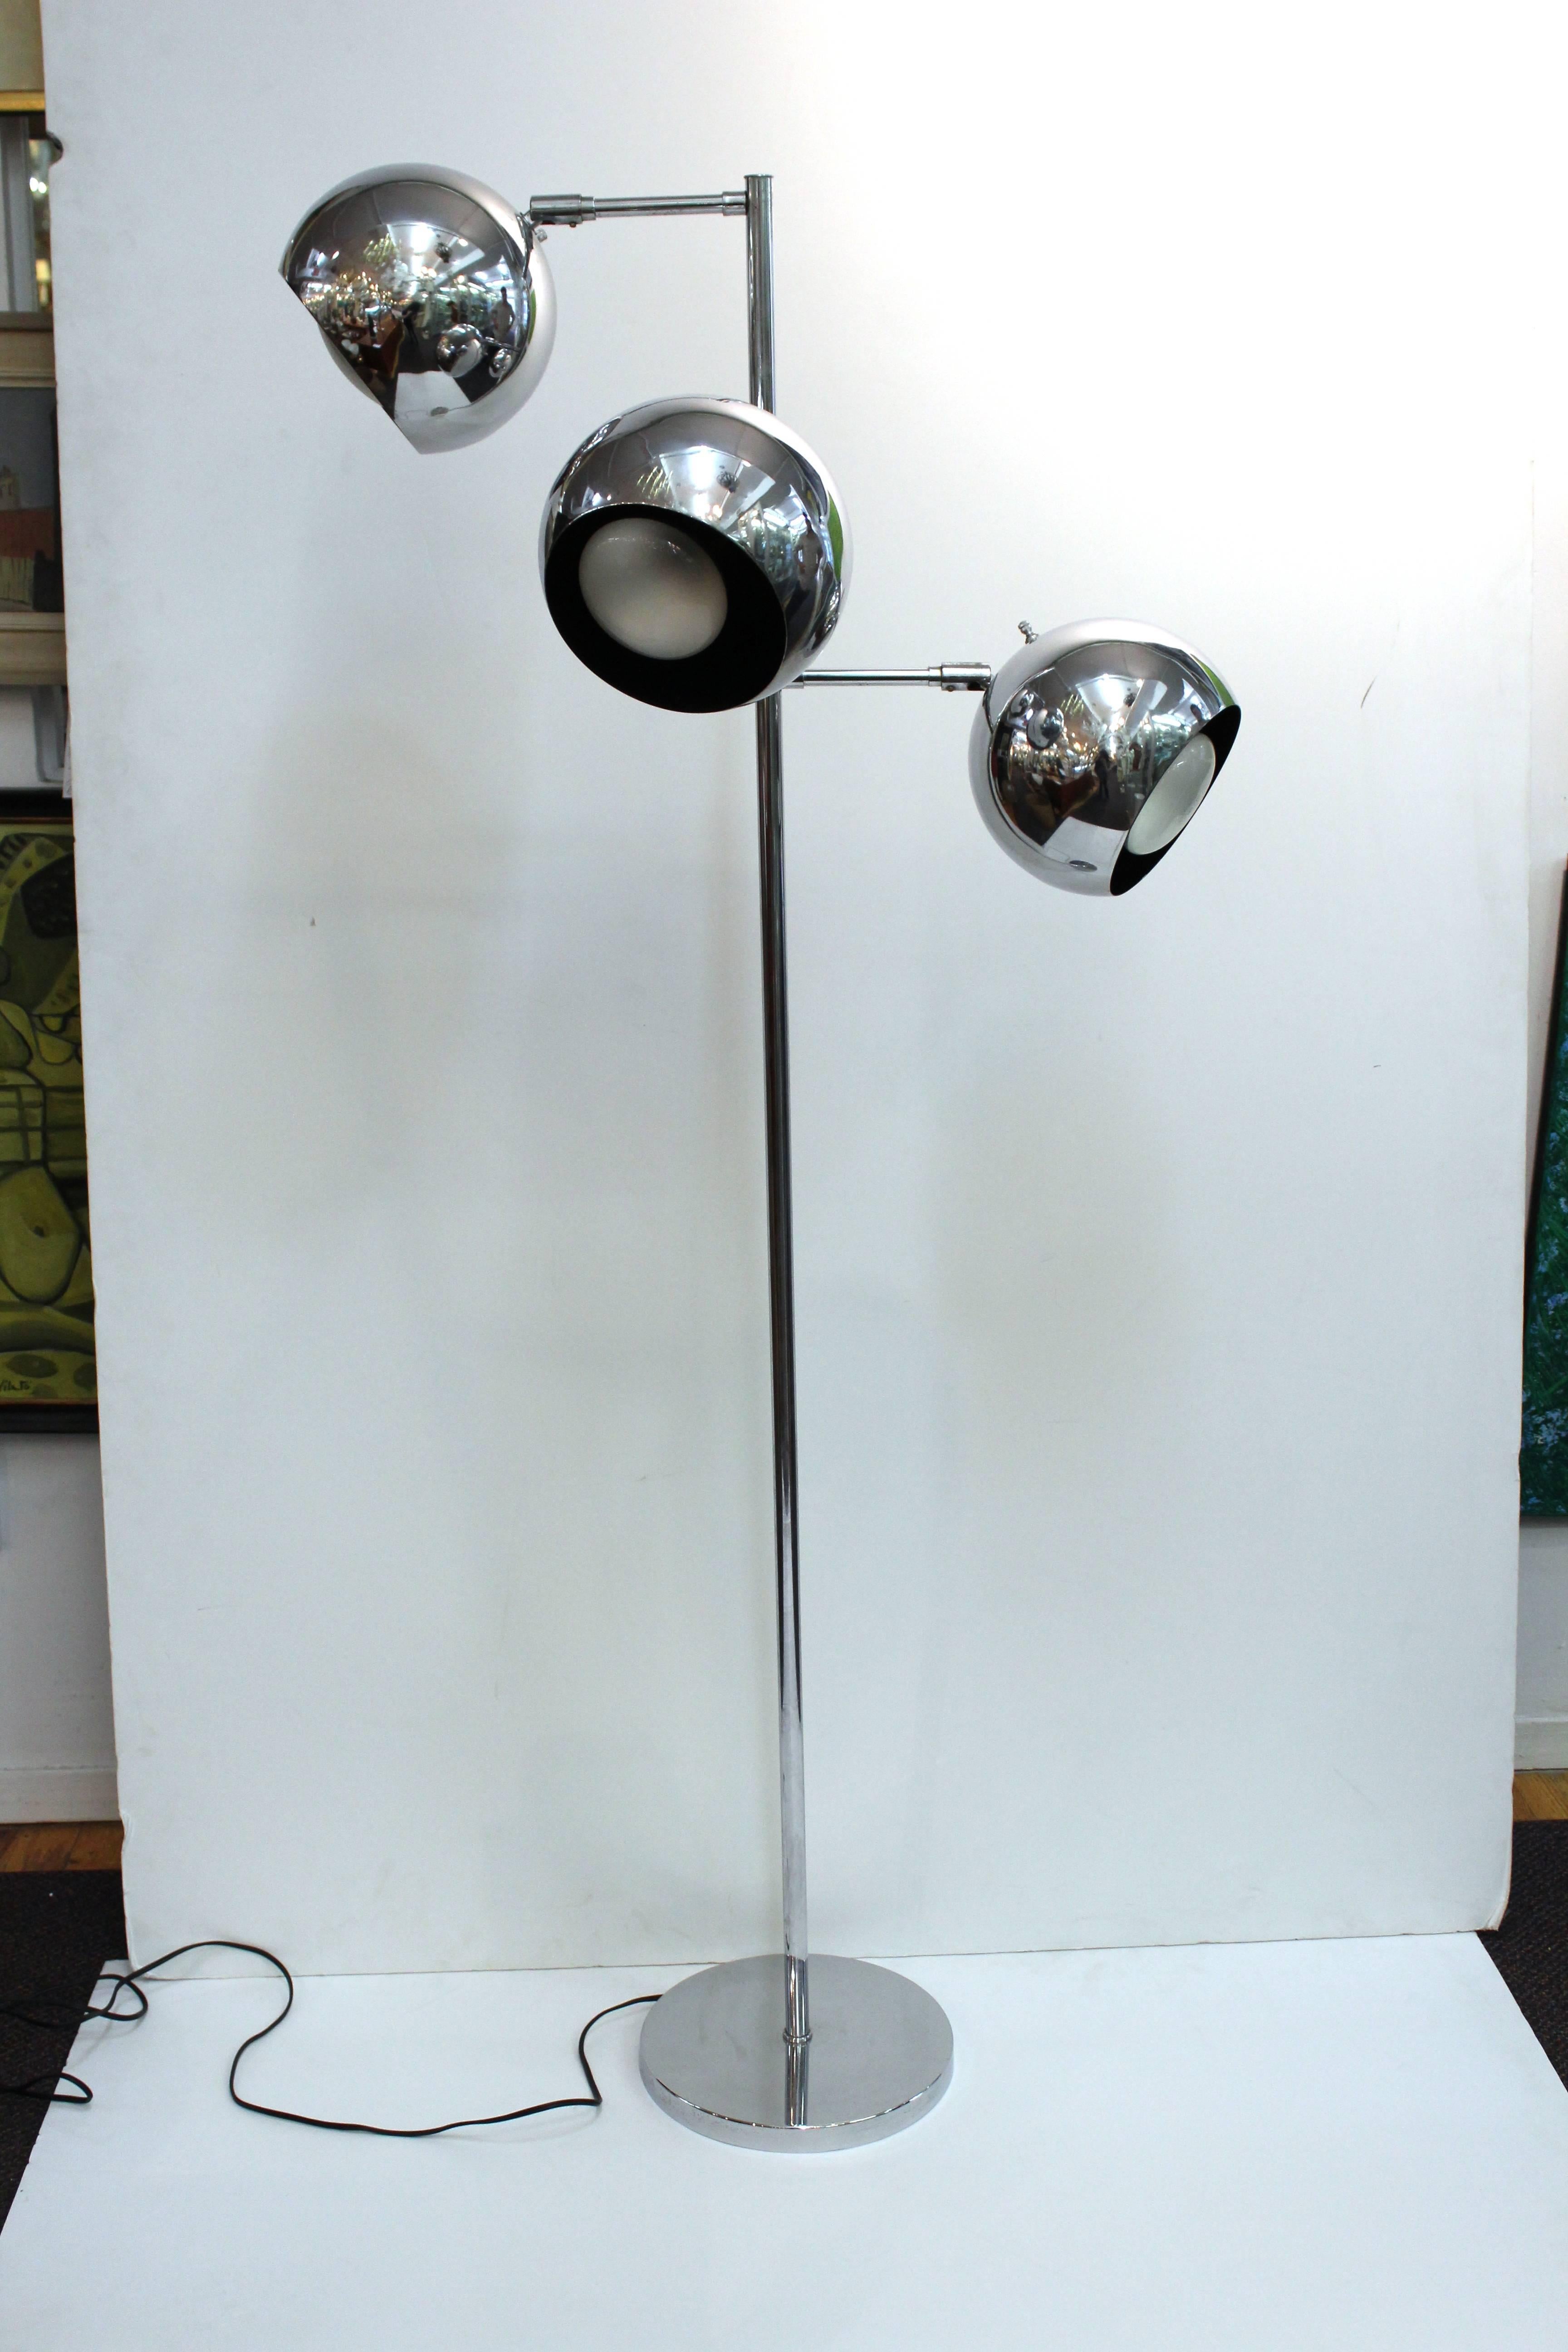 Chrome floor lamp by Koch & Lowy with three arms at different heights; each with a rounded chrome shade at the end. Features include a small mechanism at the end of each arm allowing for the rounded ends to adjust position. 

110626
 